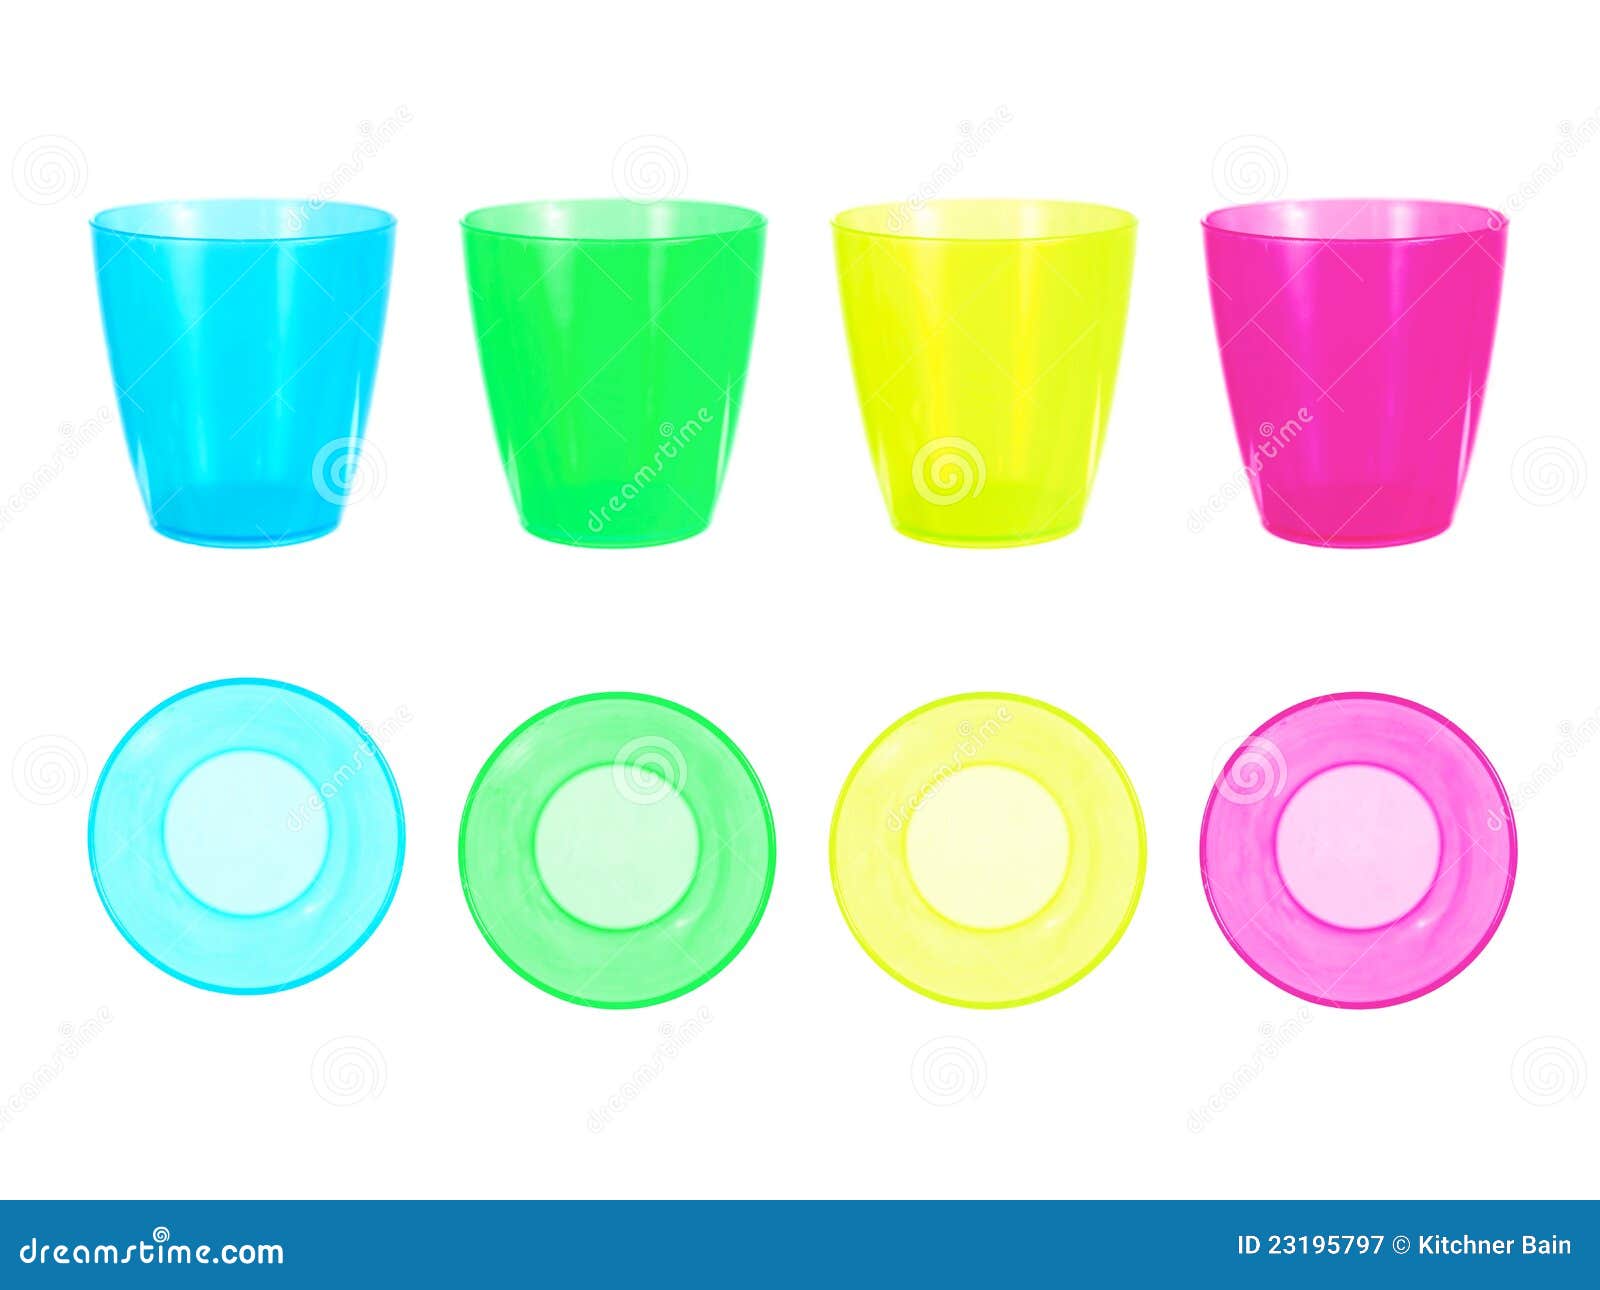 Drinking Cups stock image. Image of color, glass, white - 23195797